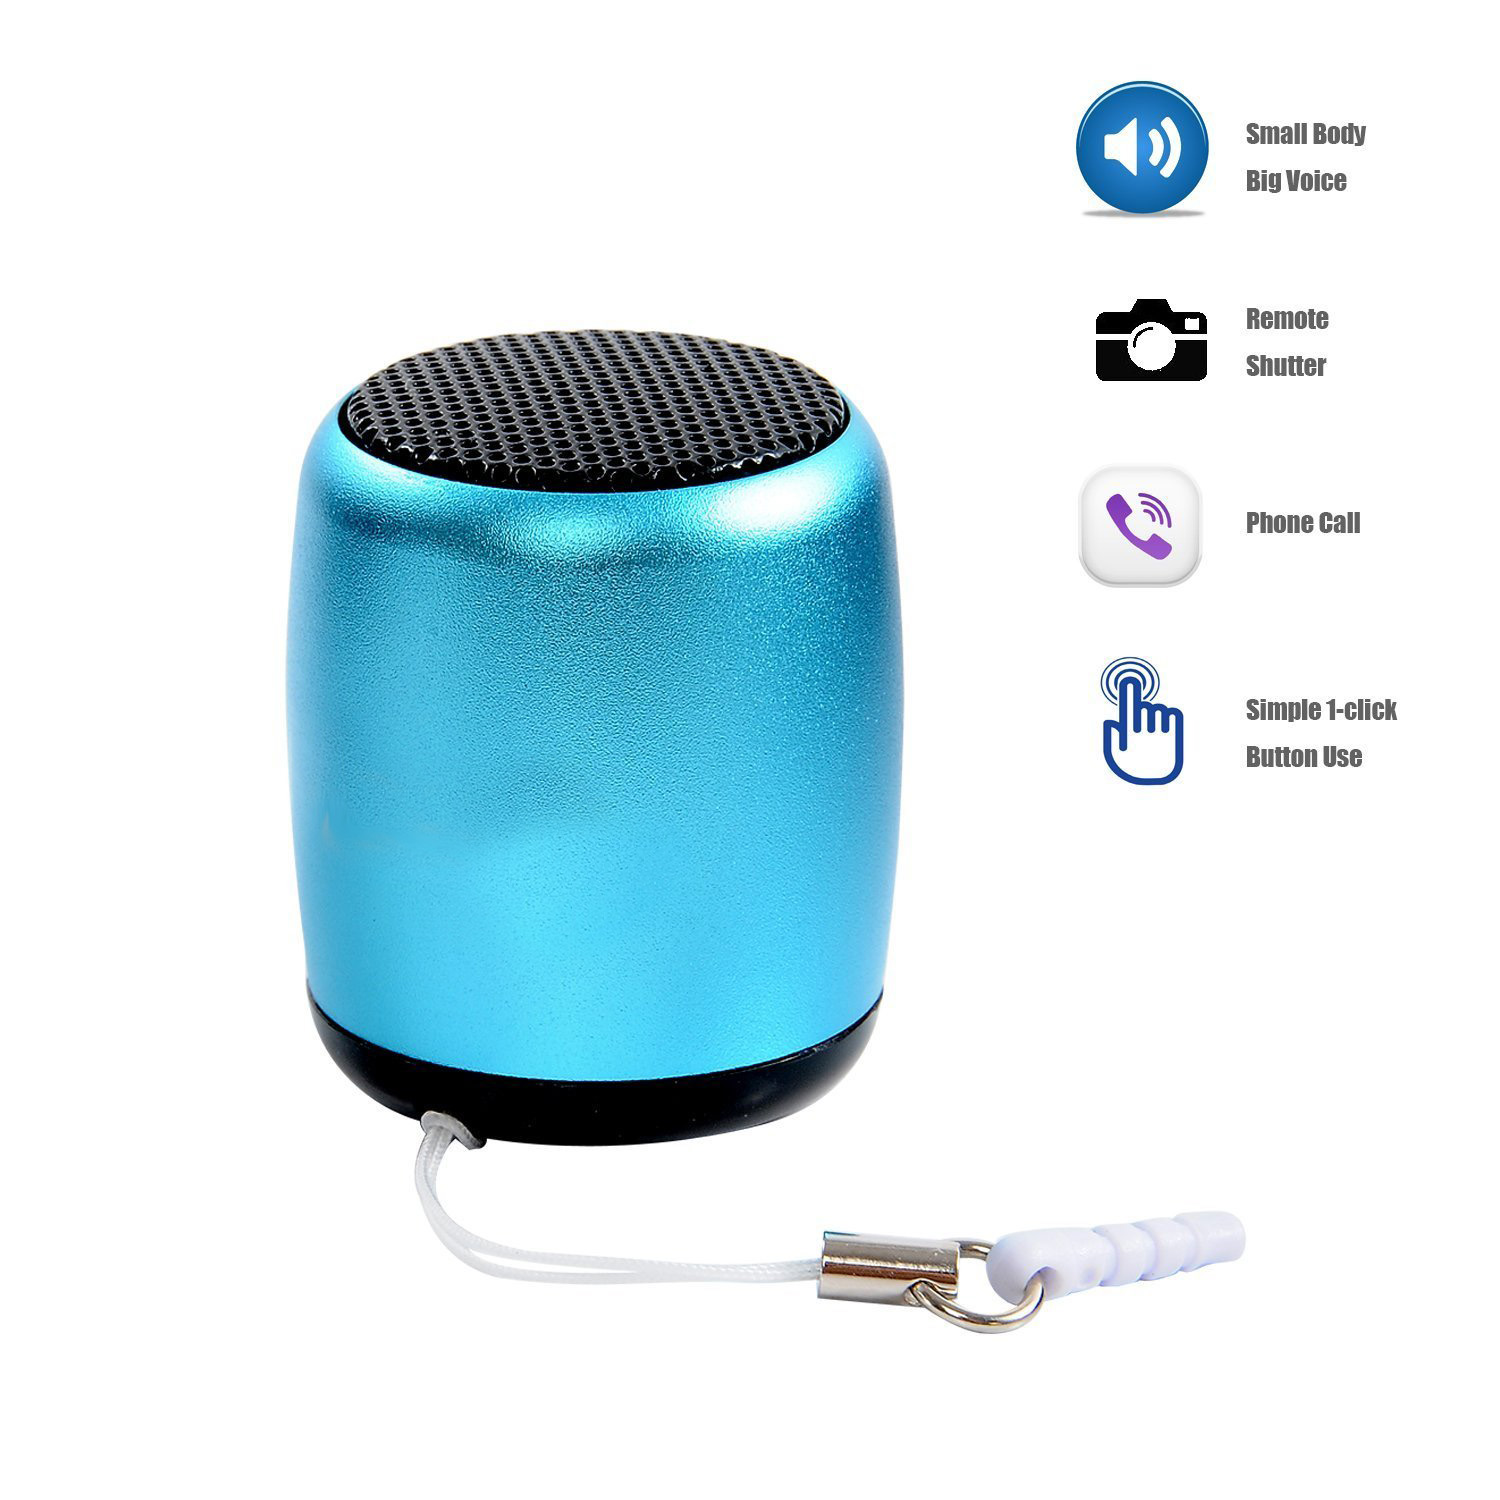 Cute Bluetooth Speaker, portable, rechargeable, Small but loud